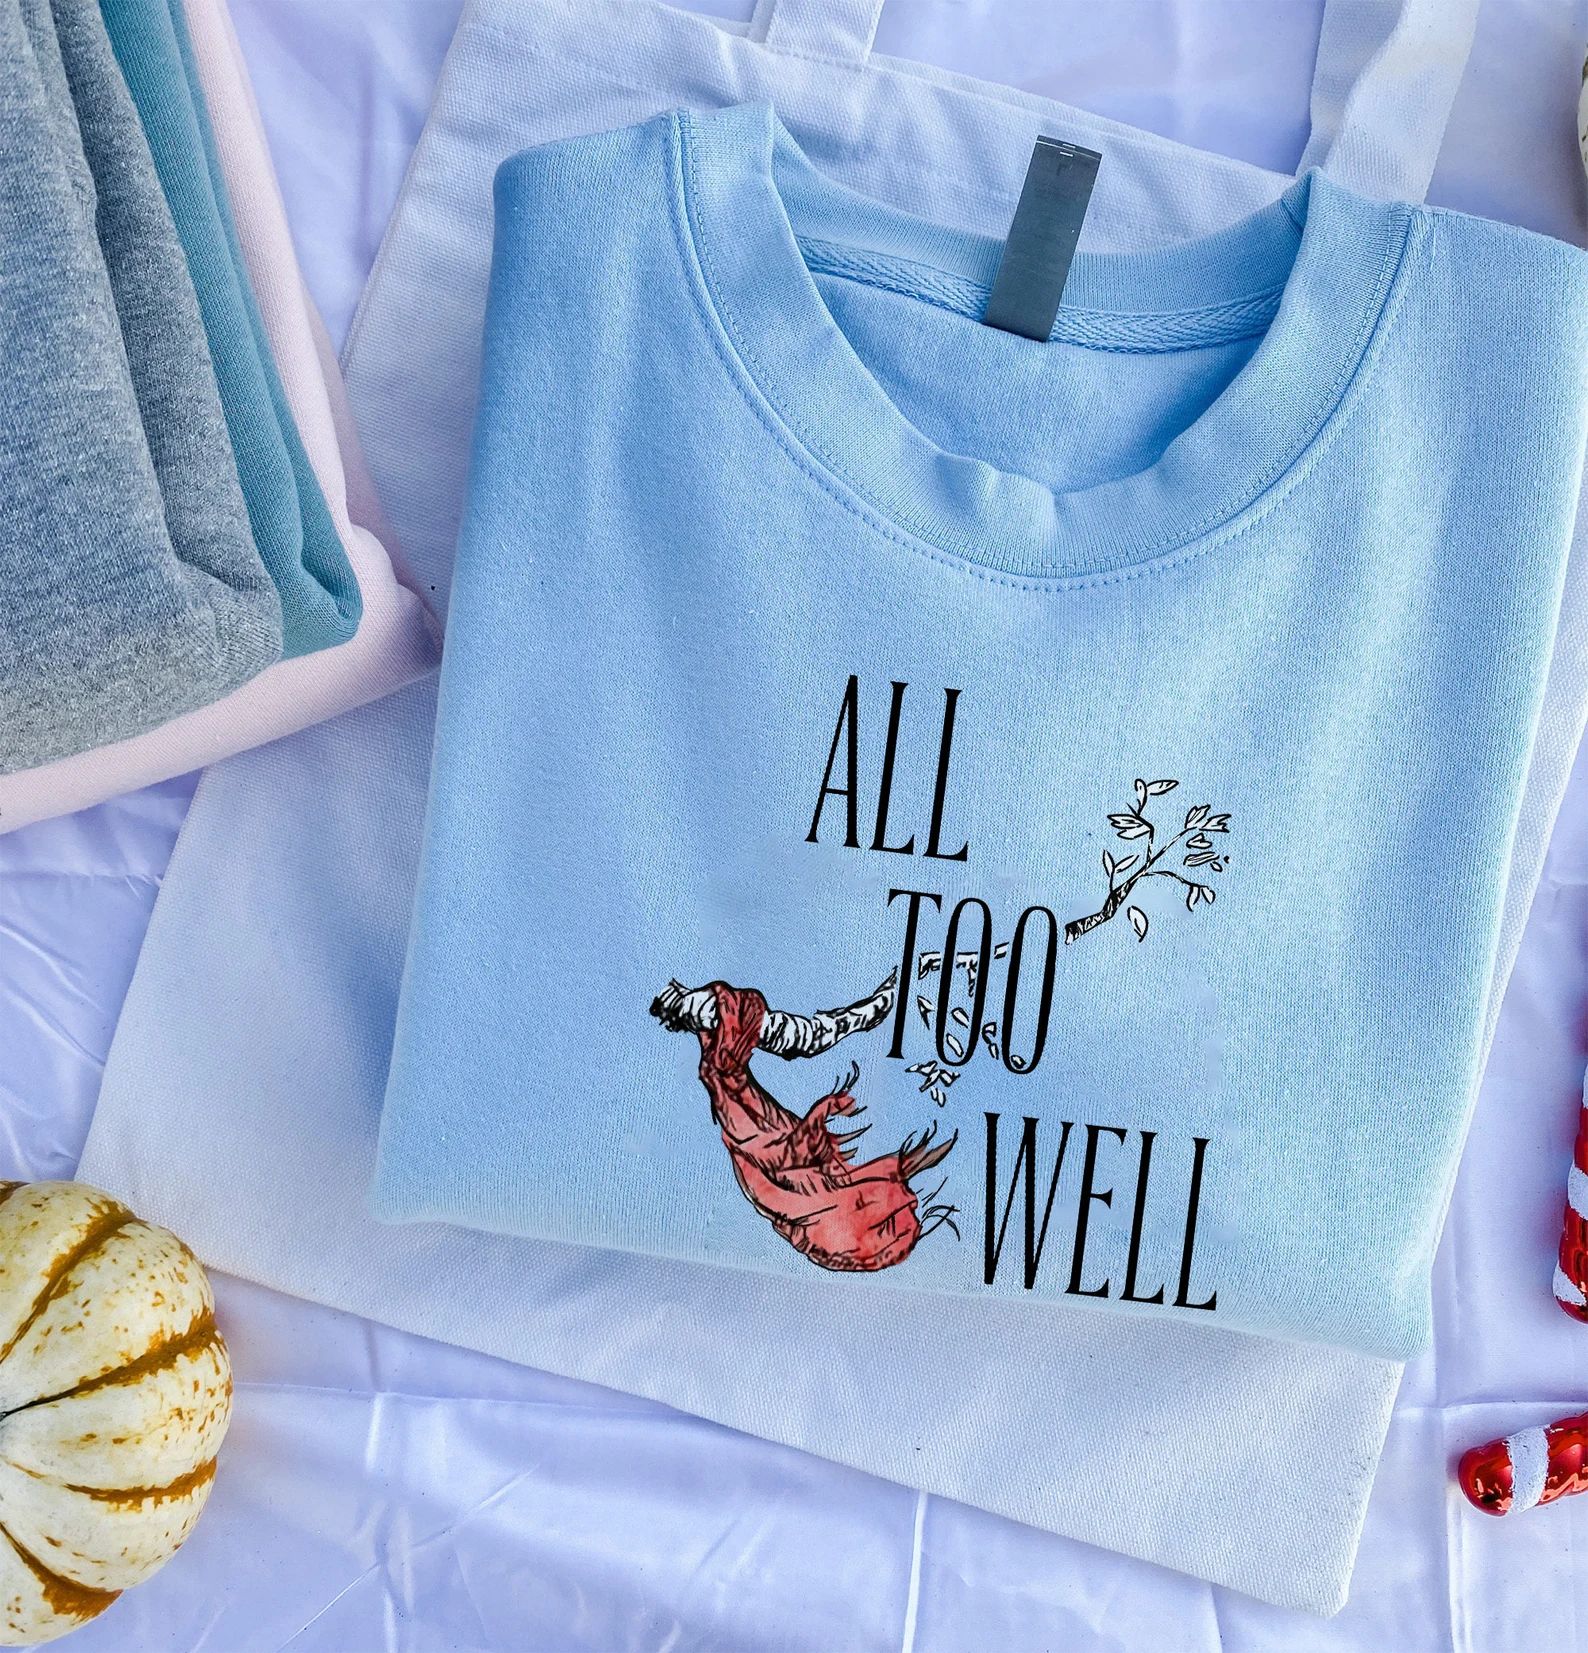 All too well Limited Edition Shirt, Taylor's version Crewneck Sweater, Gift for swiftie | Etsy (US)